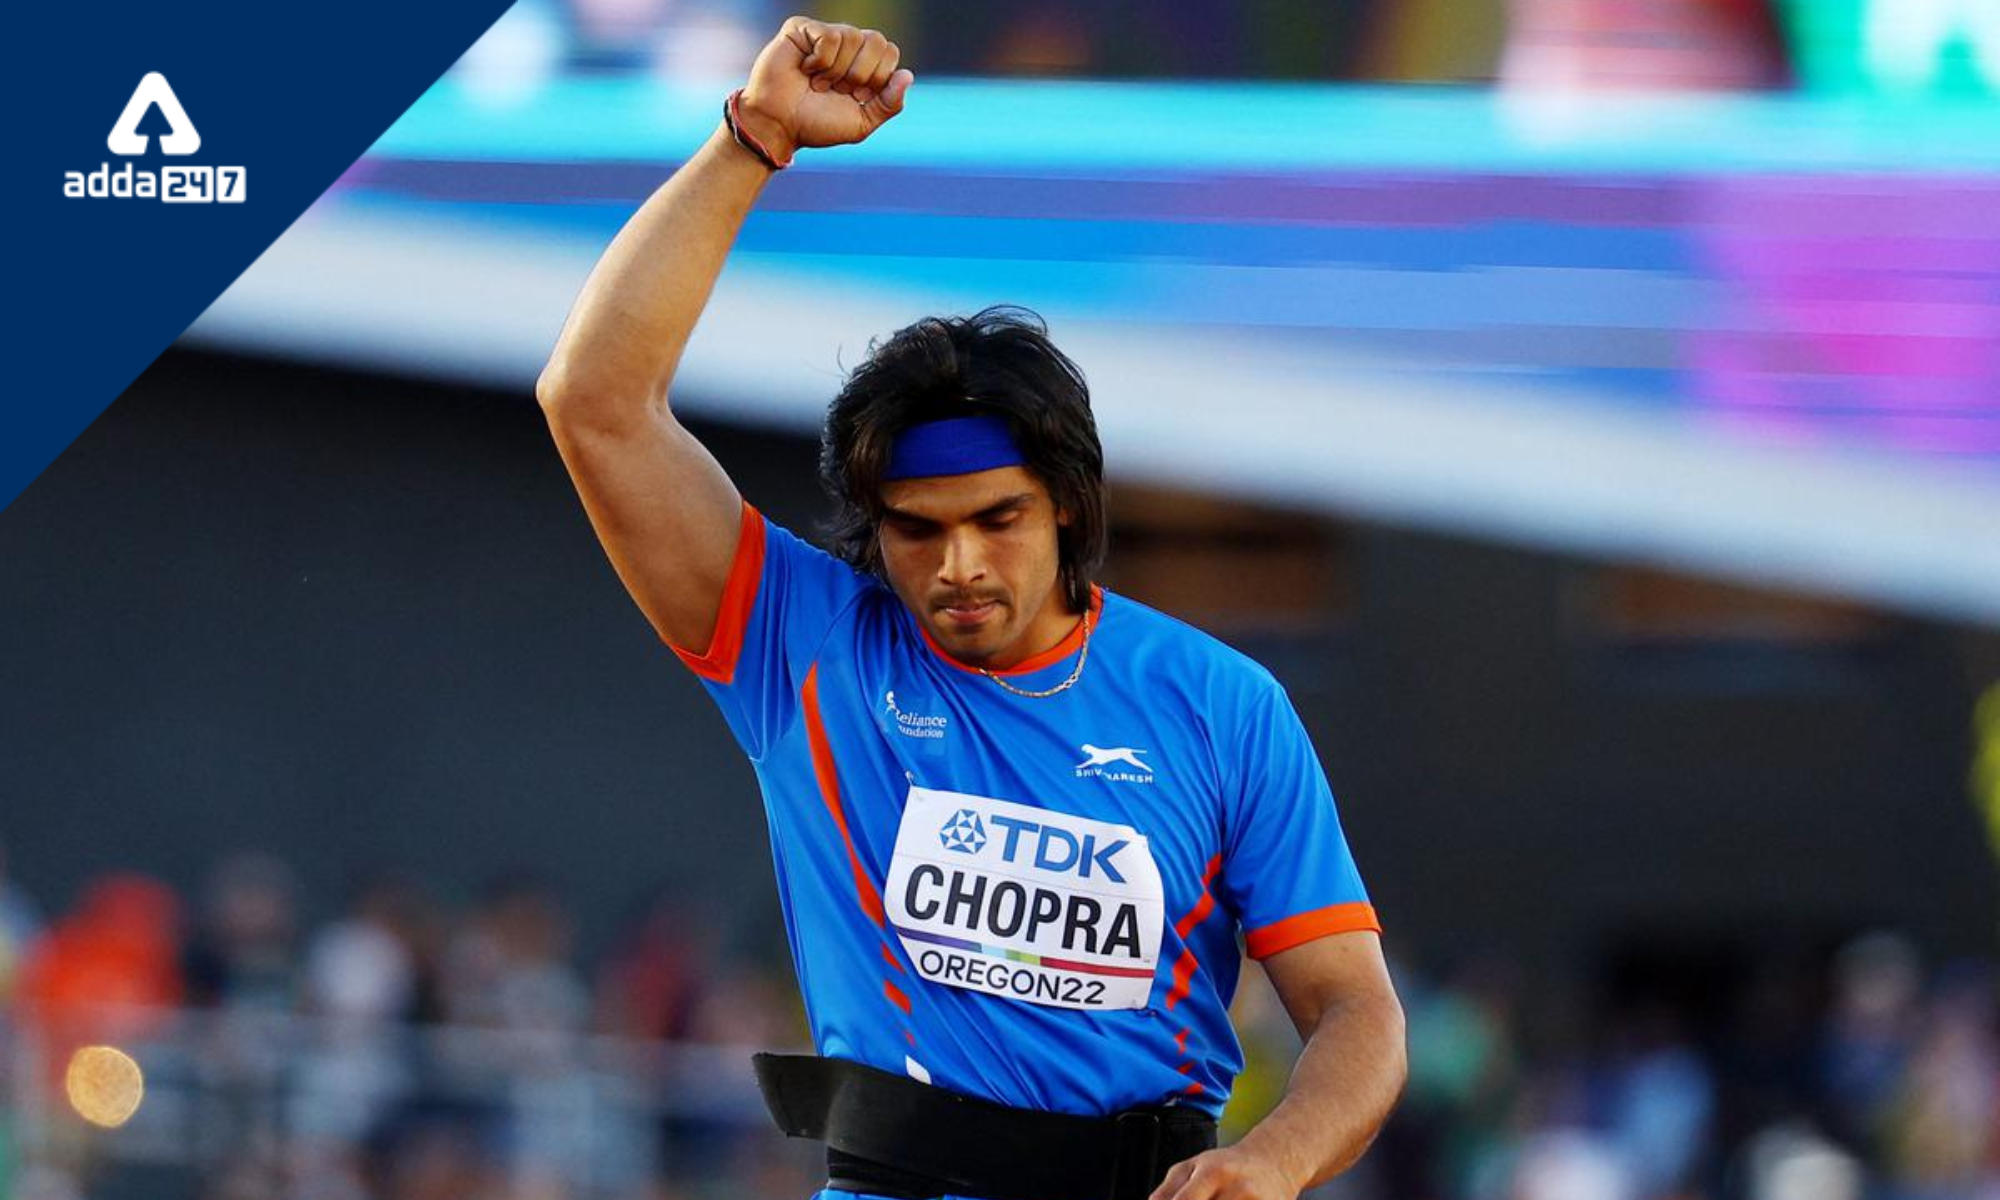 Neeraj Chopra wins a silver medal in the javelin at the world championships_40.1